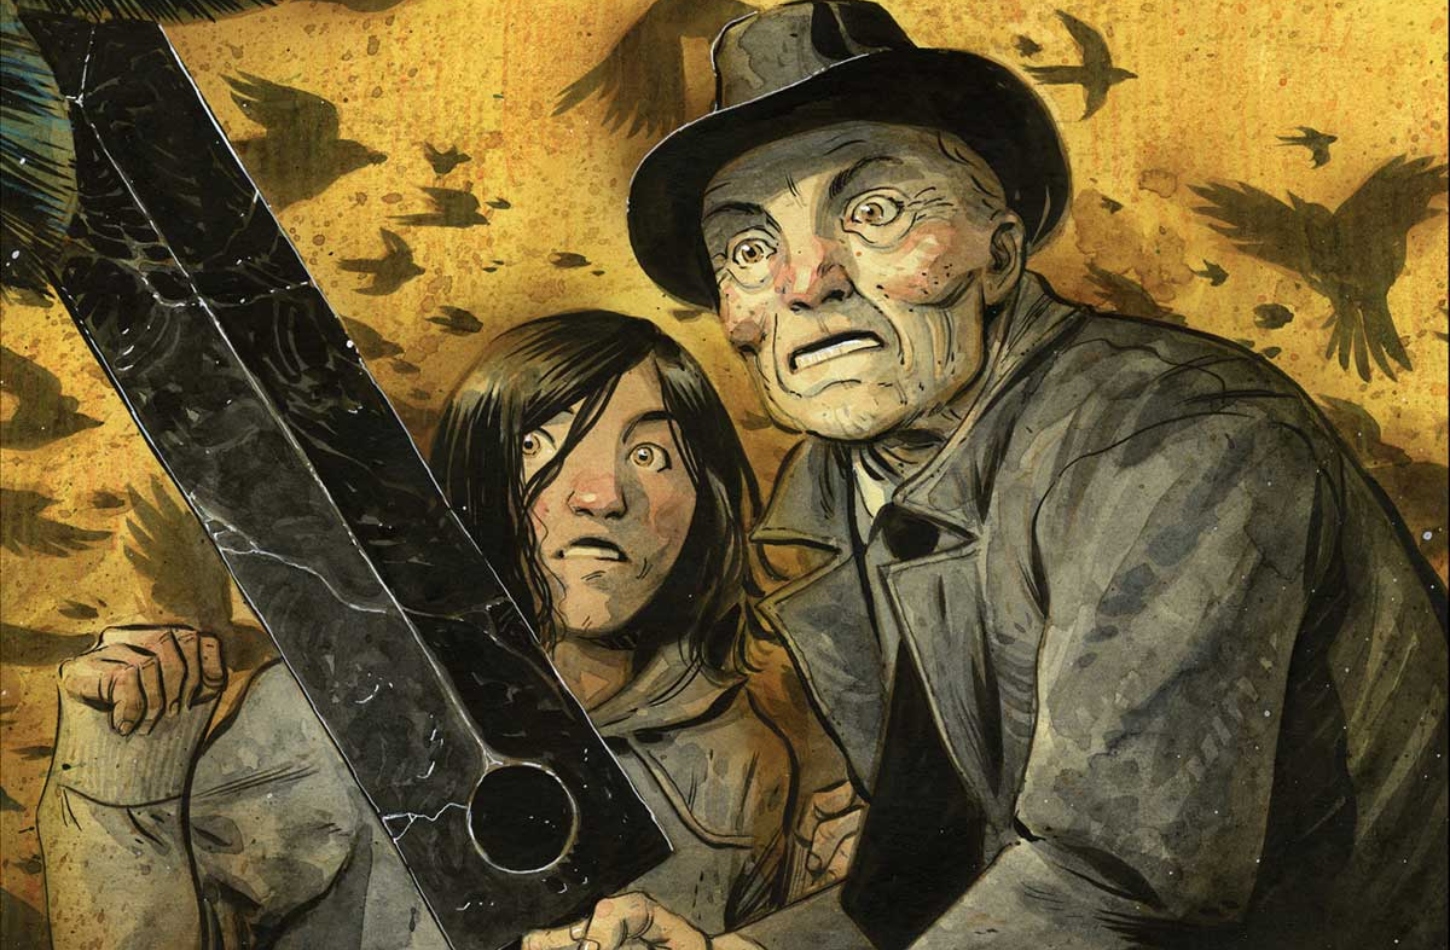 EXCLUSIVE Dark Horse Preview: Lonesome Hunters #1